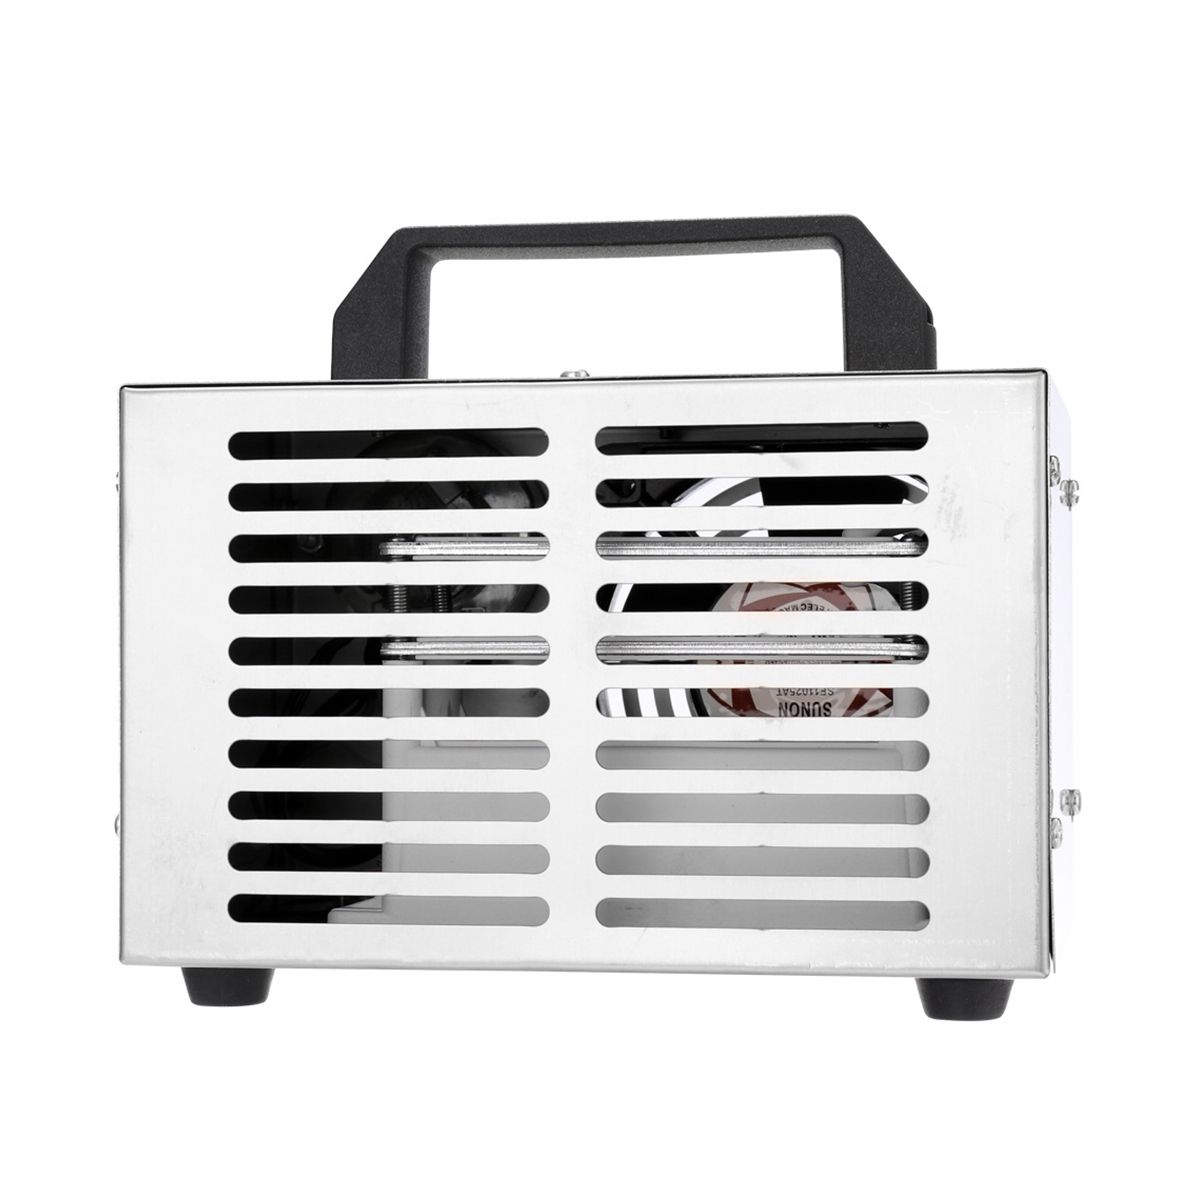 220V-24gh-TimingSwitch-Ozone-Air-Purifier-Ozone-Generator-Home-Cleaning-Machine-1695010